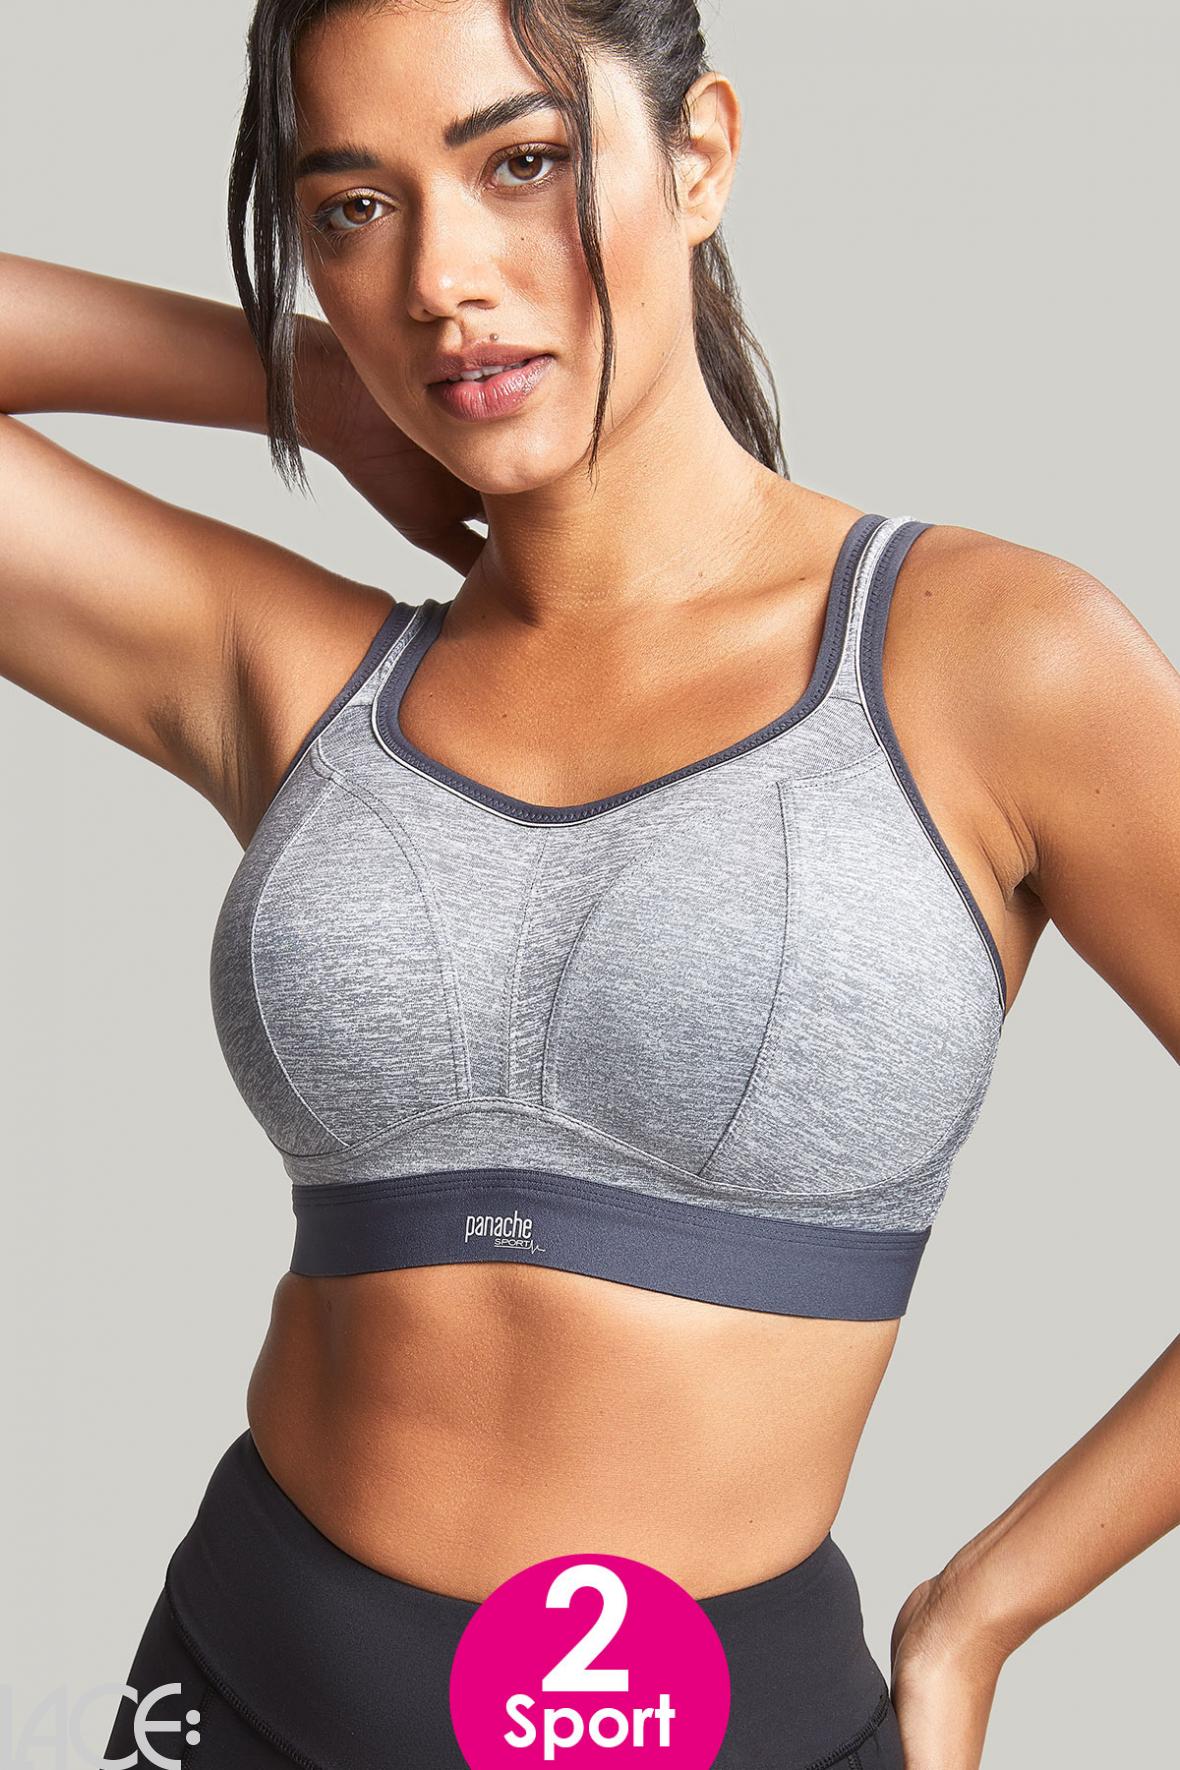 Panache Sport Sports bra non-wired F-K cup CHARCOAL MARL –